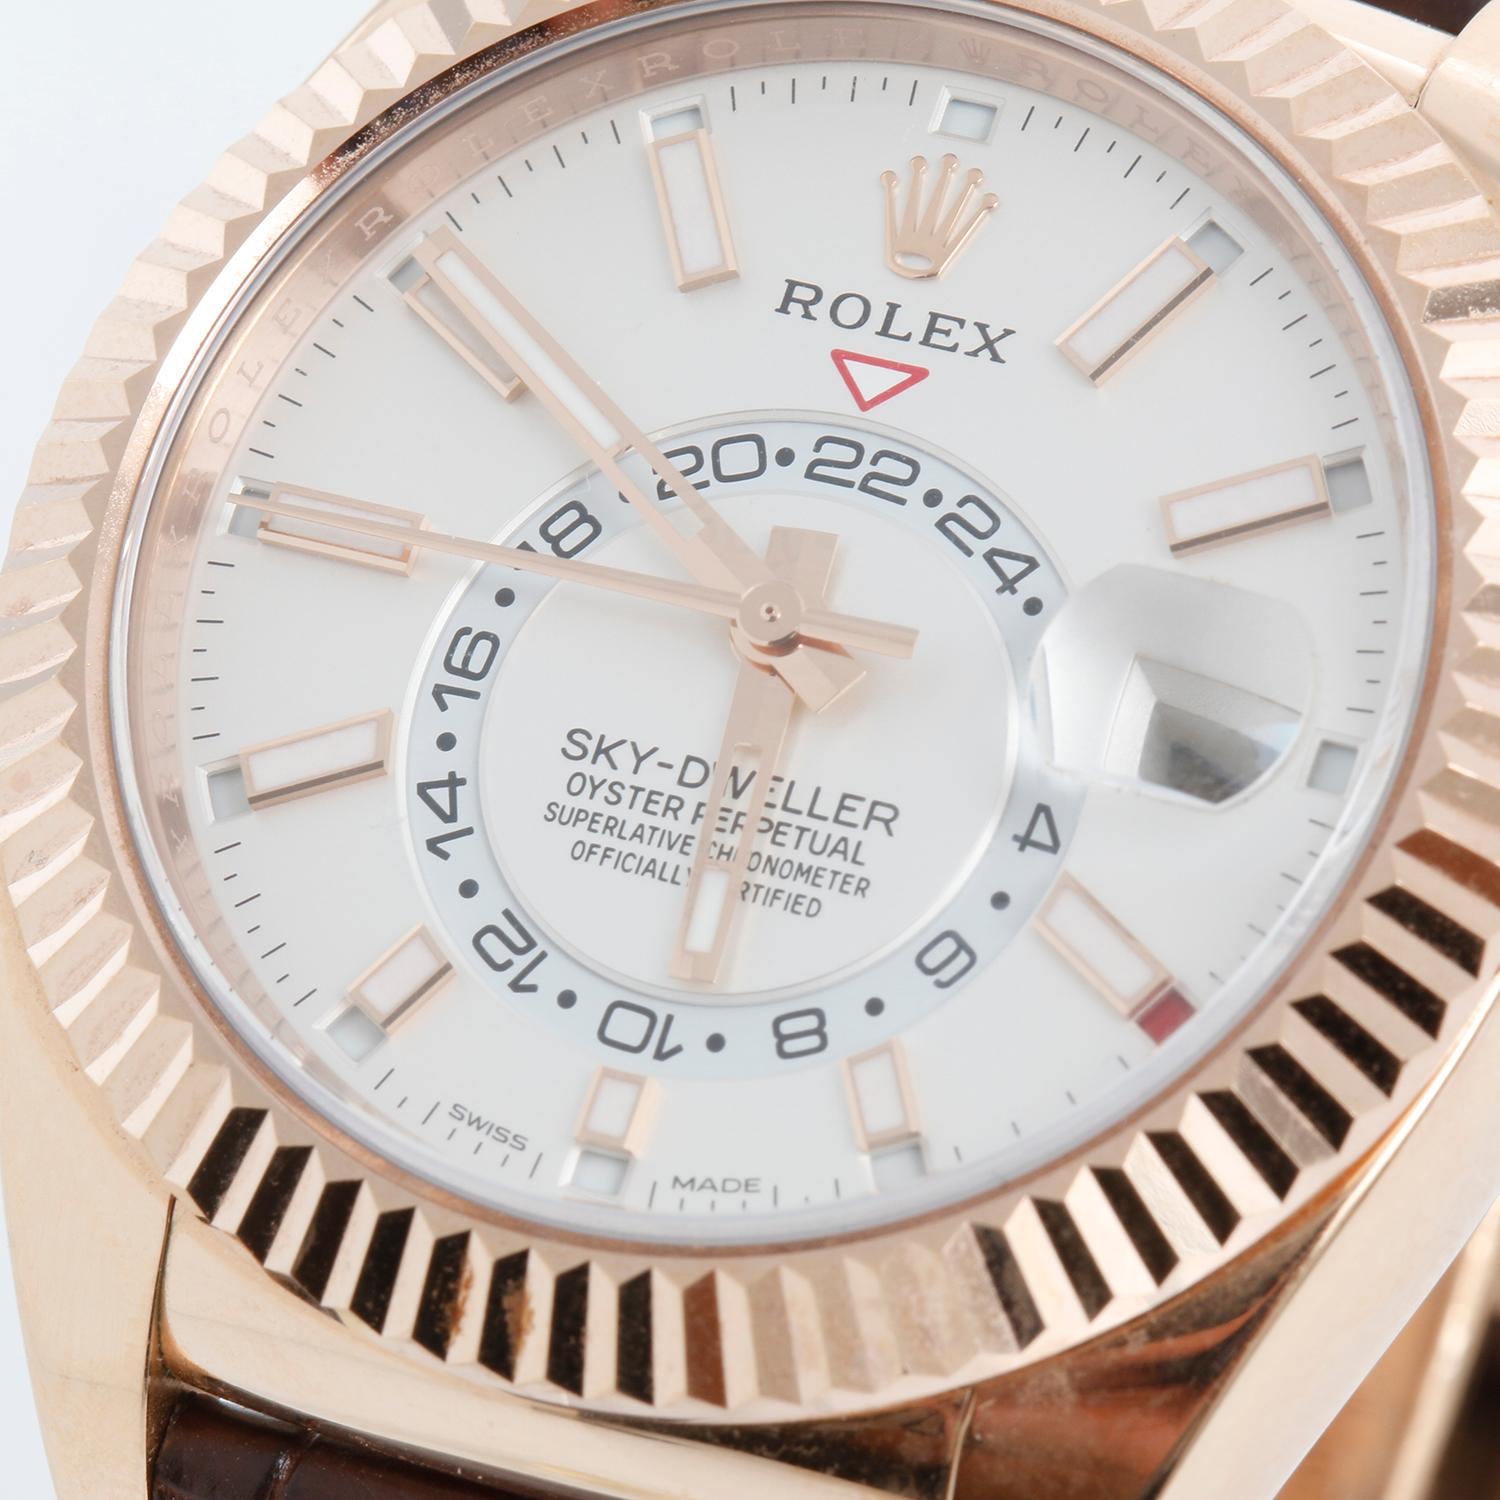 Rolex Sky-Dweller 326135 Men's 18k Rose Gold Annual Calendar GMT Watch  - Automatic winding, perpetual calendar and GMT feature. 18k rose gold case with fluted bezel  (42mm diameter). White dial with rose gold Arabic numerals; date; second time